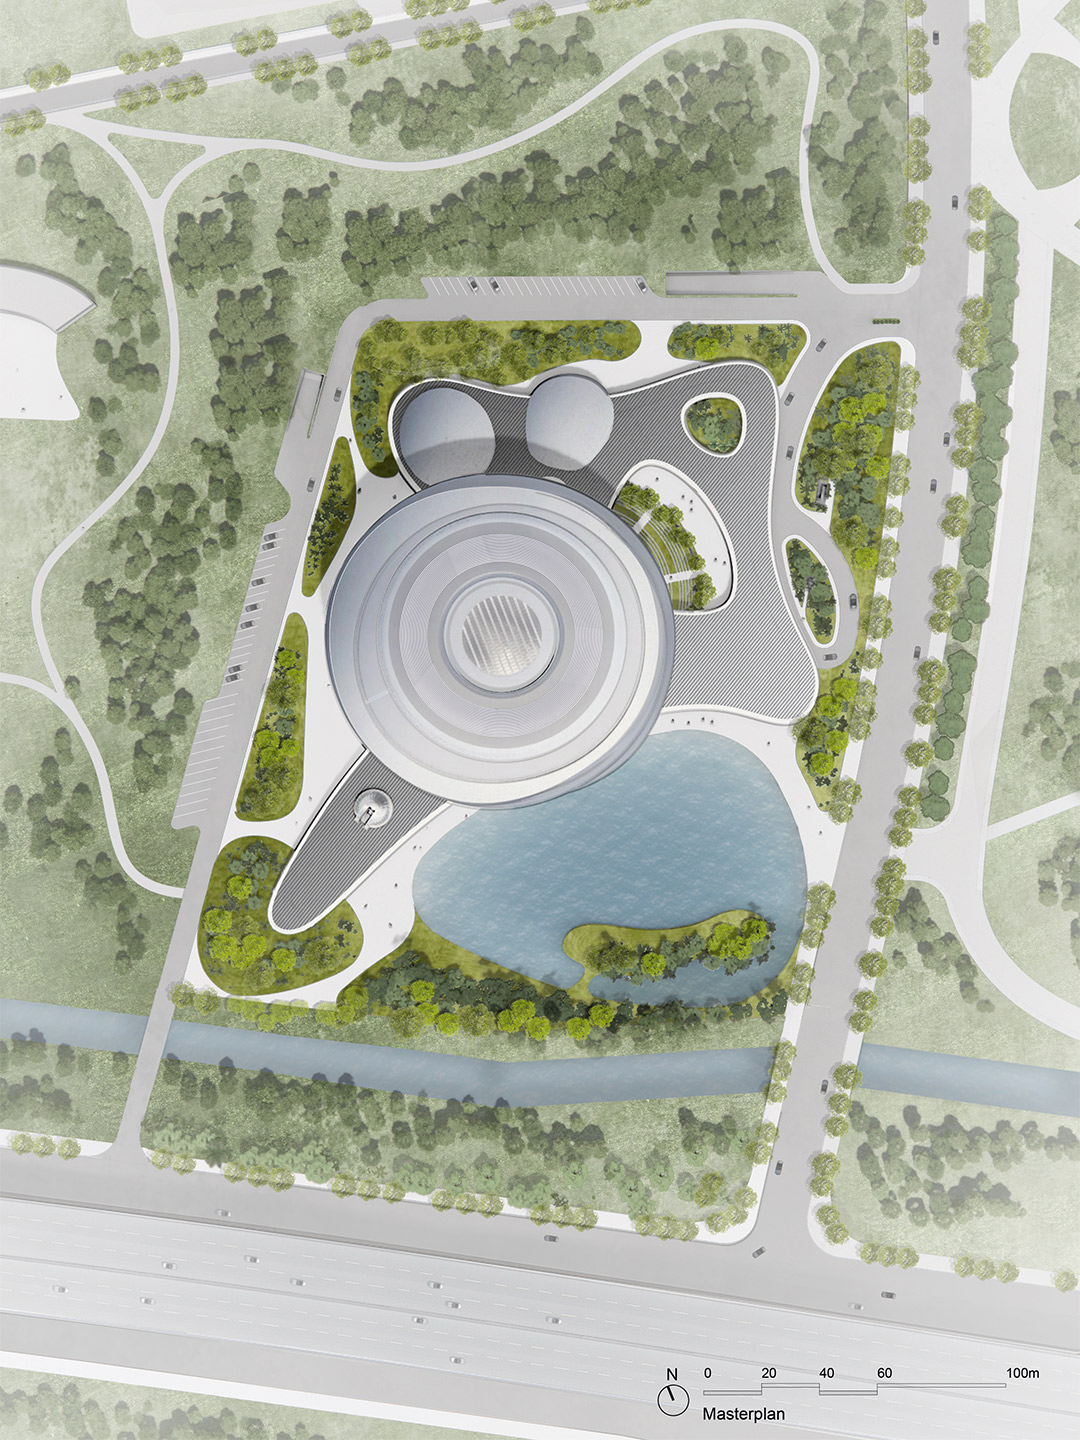 Hainan Science and Technology Museum by MAD Architects 